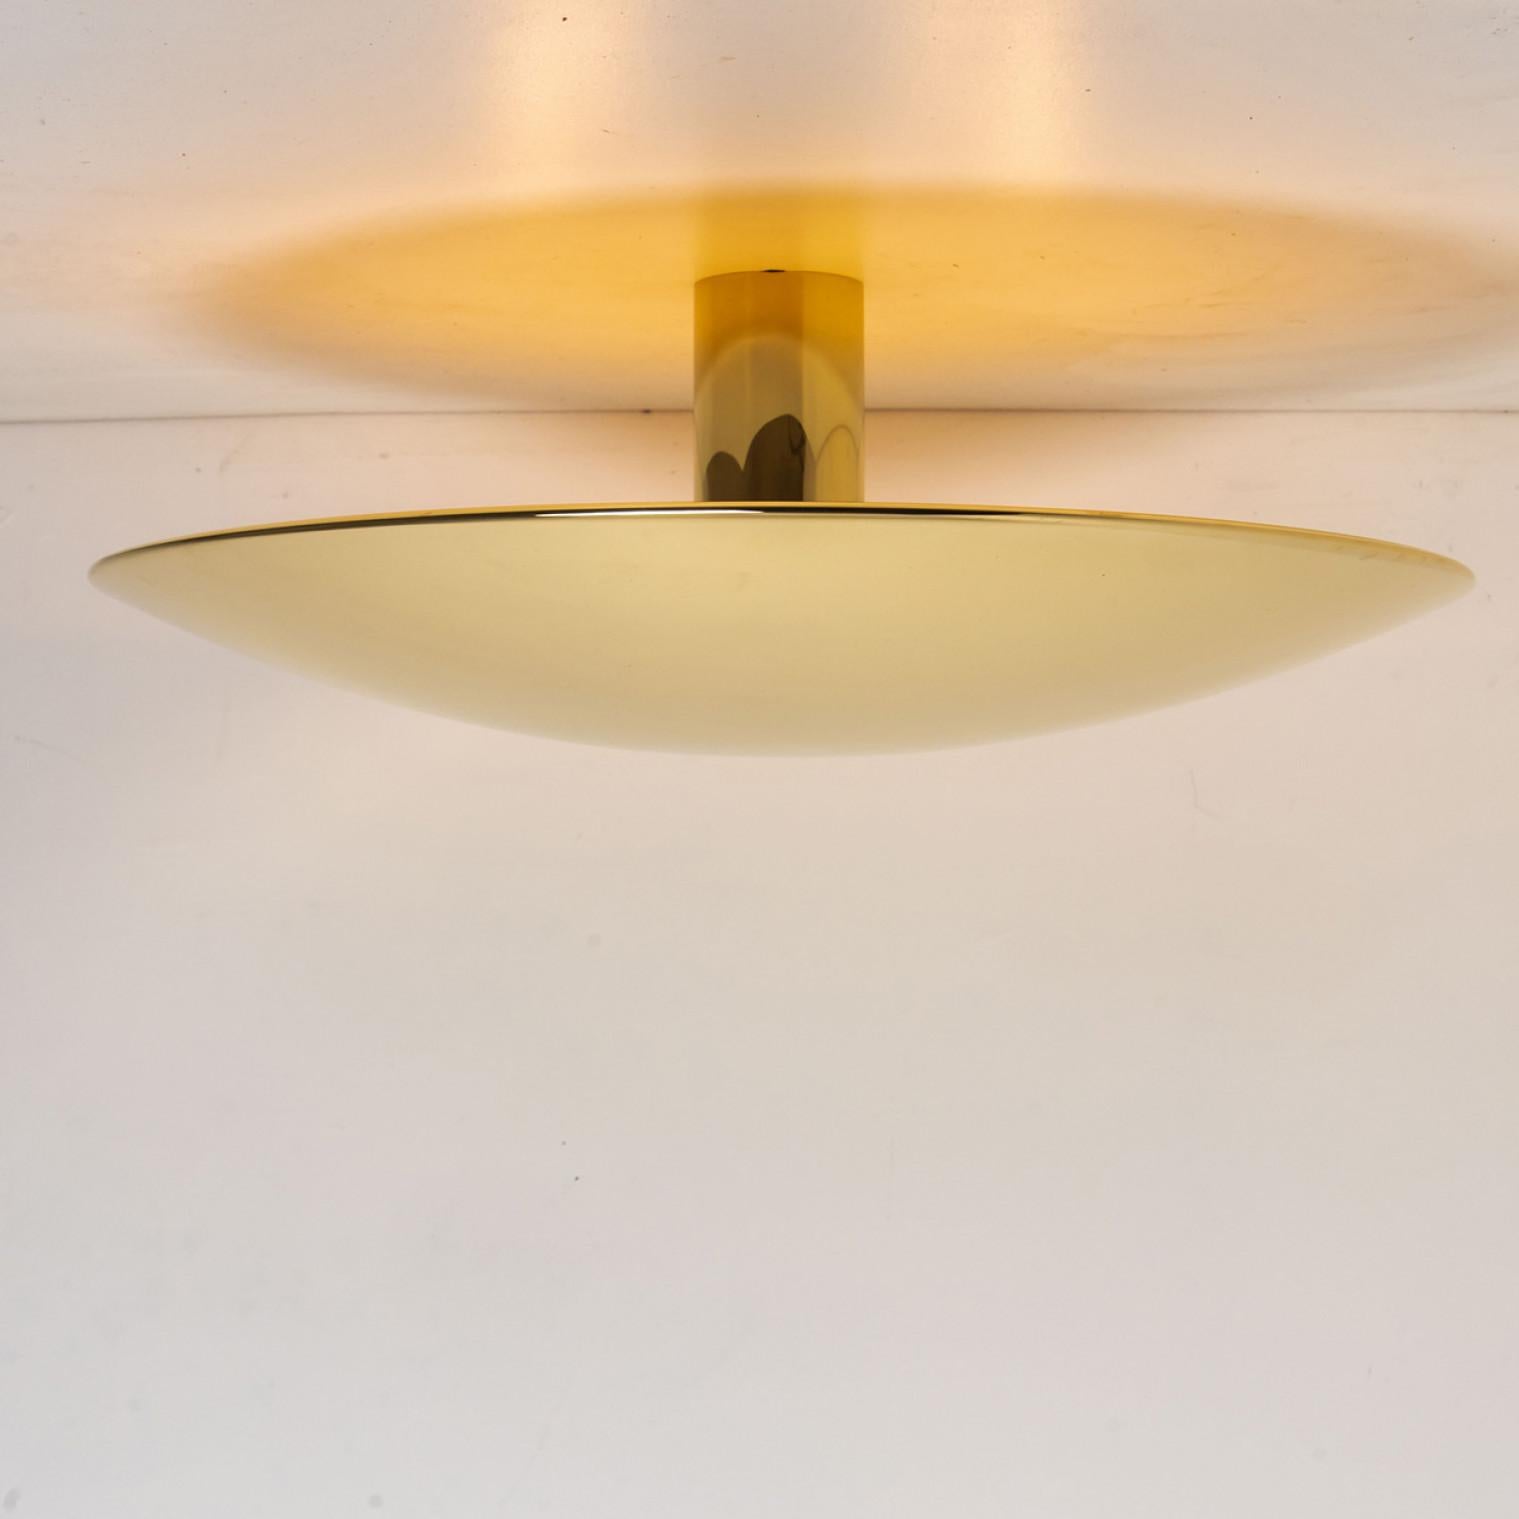 1 of the 2 high quality brass flush mount ceiling lights or wall lights by Florian Schulz. Solid brass with five bulb setup around that stem, the flush mounts can also be used as wall lights.

The stylish and clean elegance of this lamp suits many